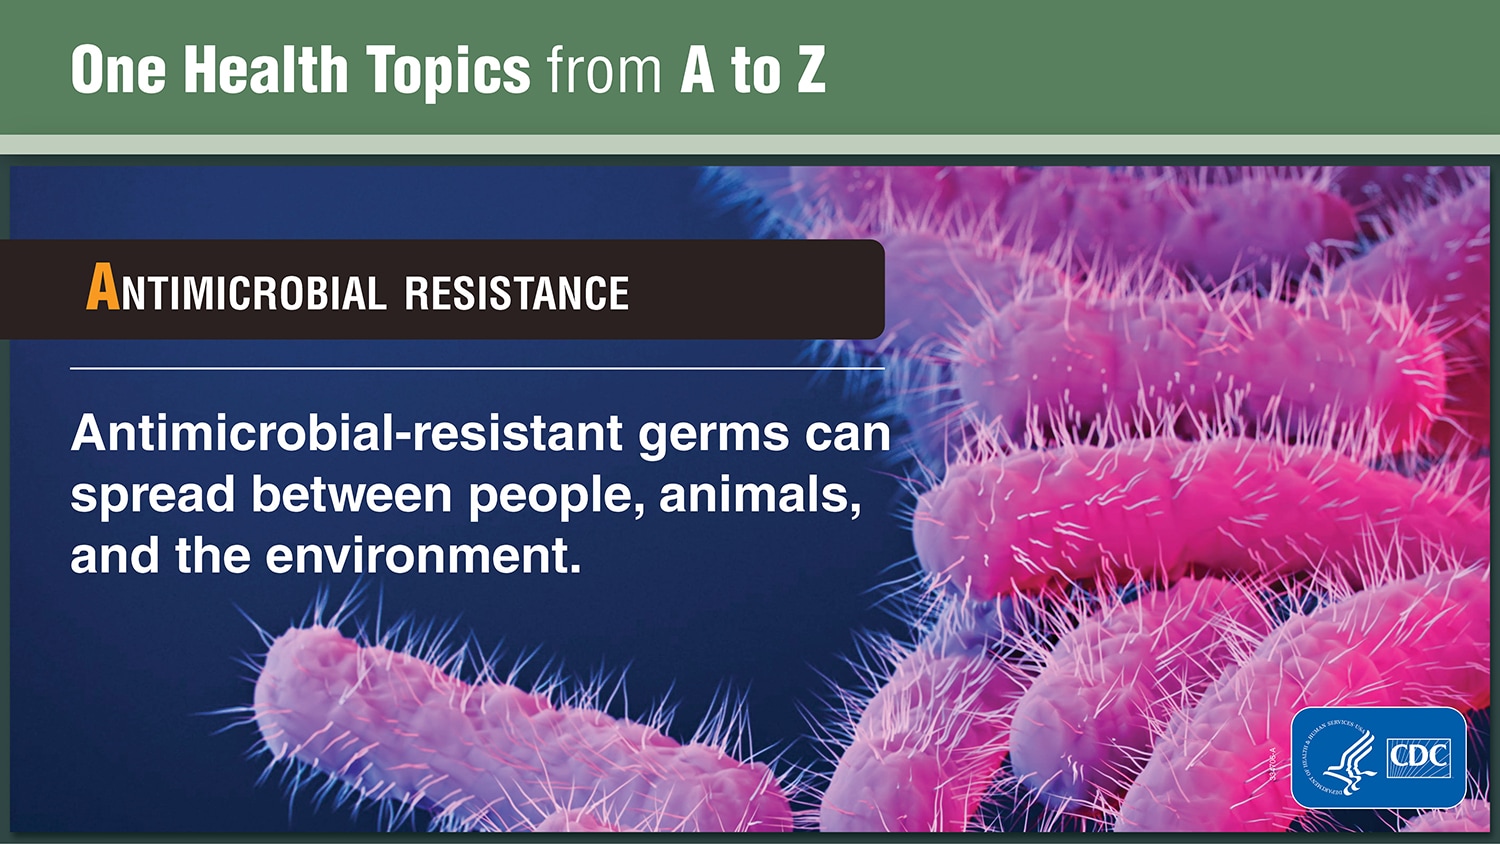 One Health Topics from A to Z explaining Antimicrobial Resistance